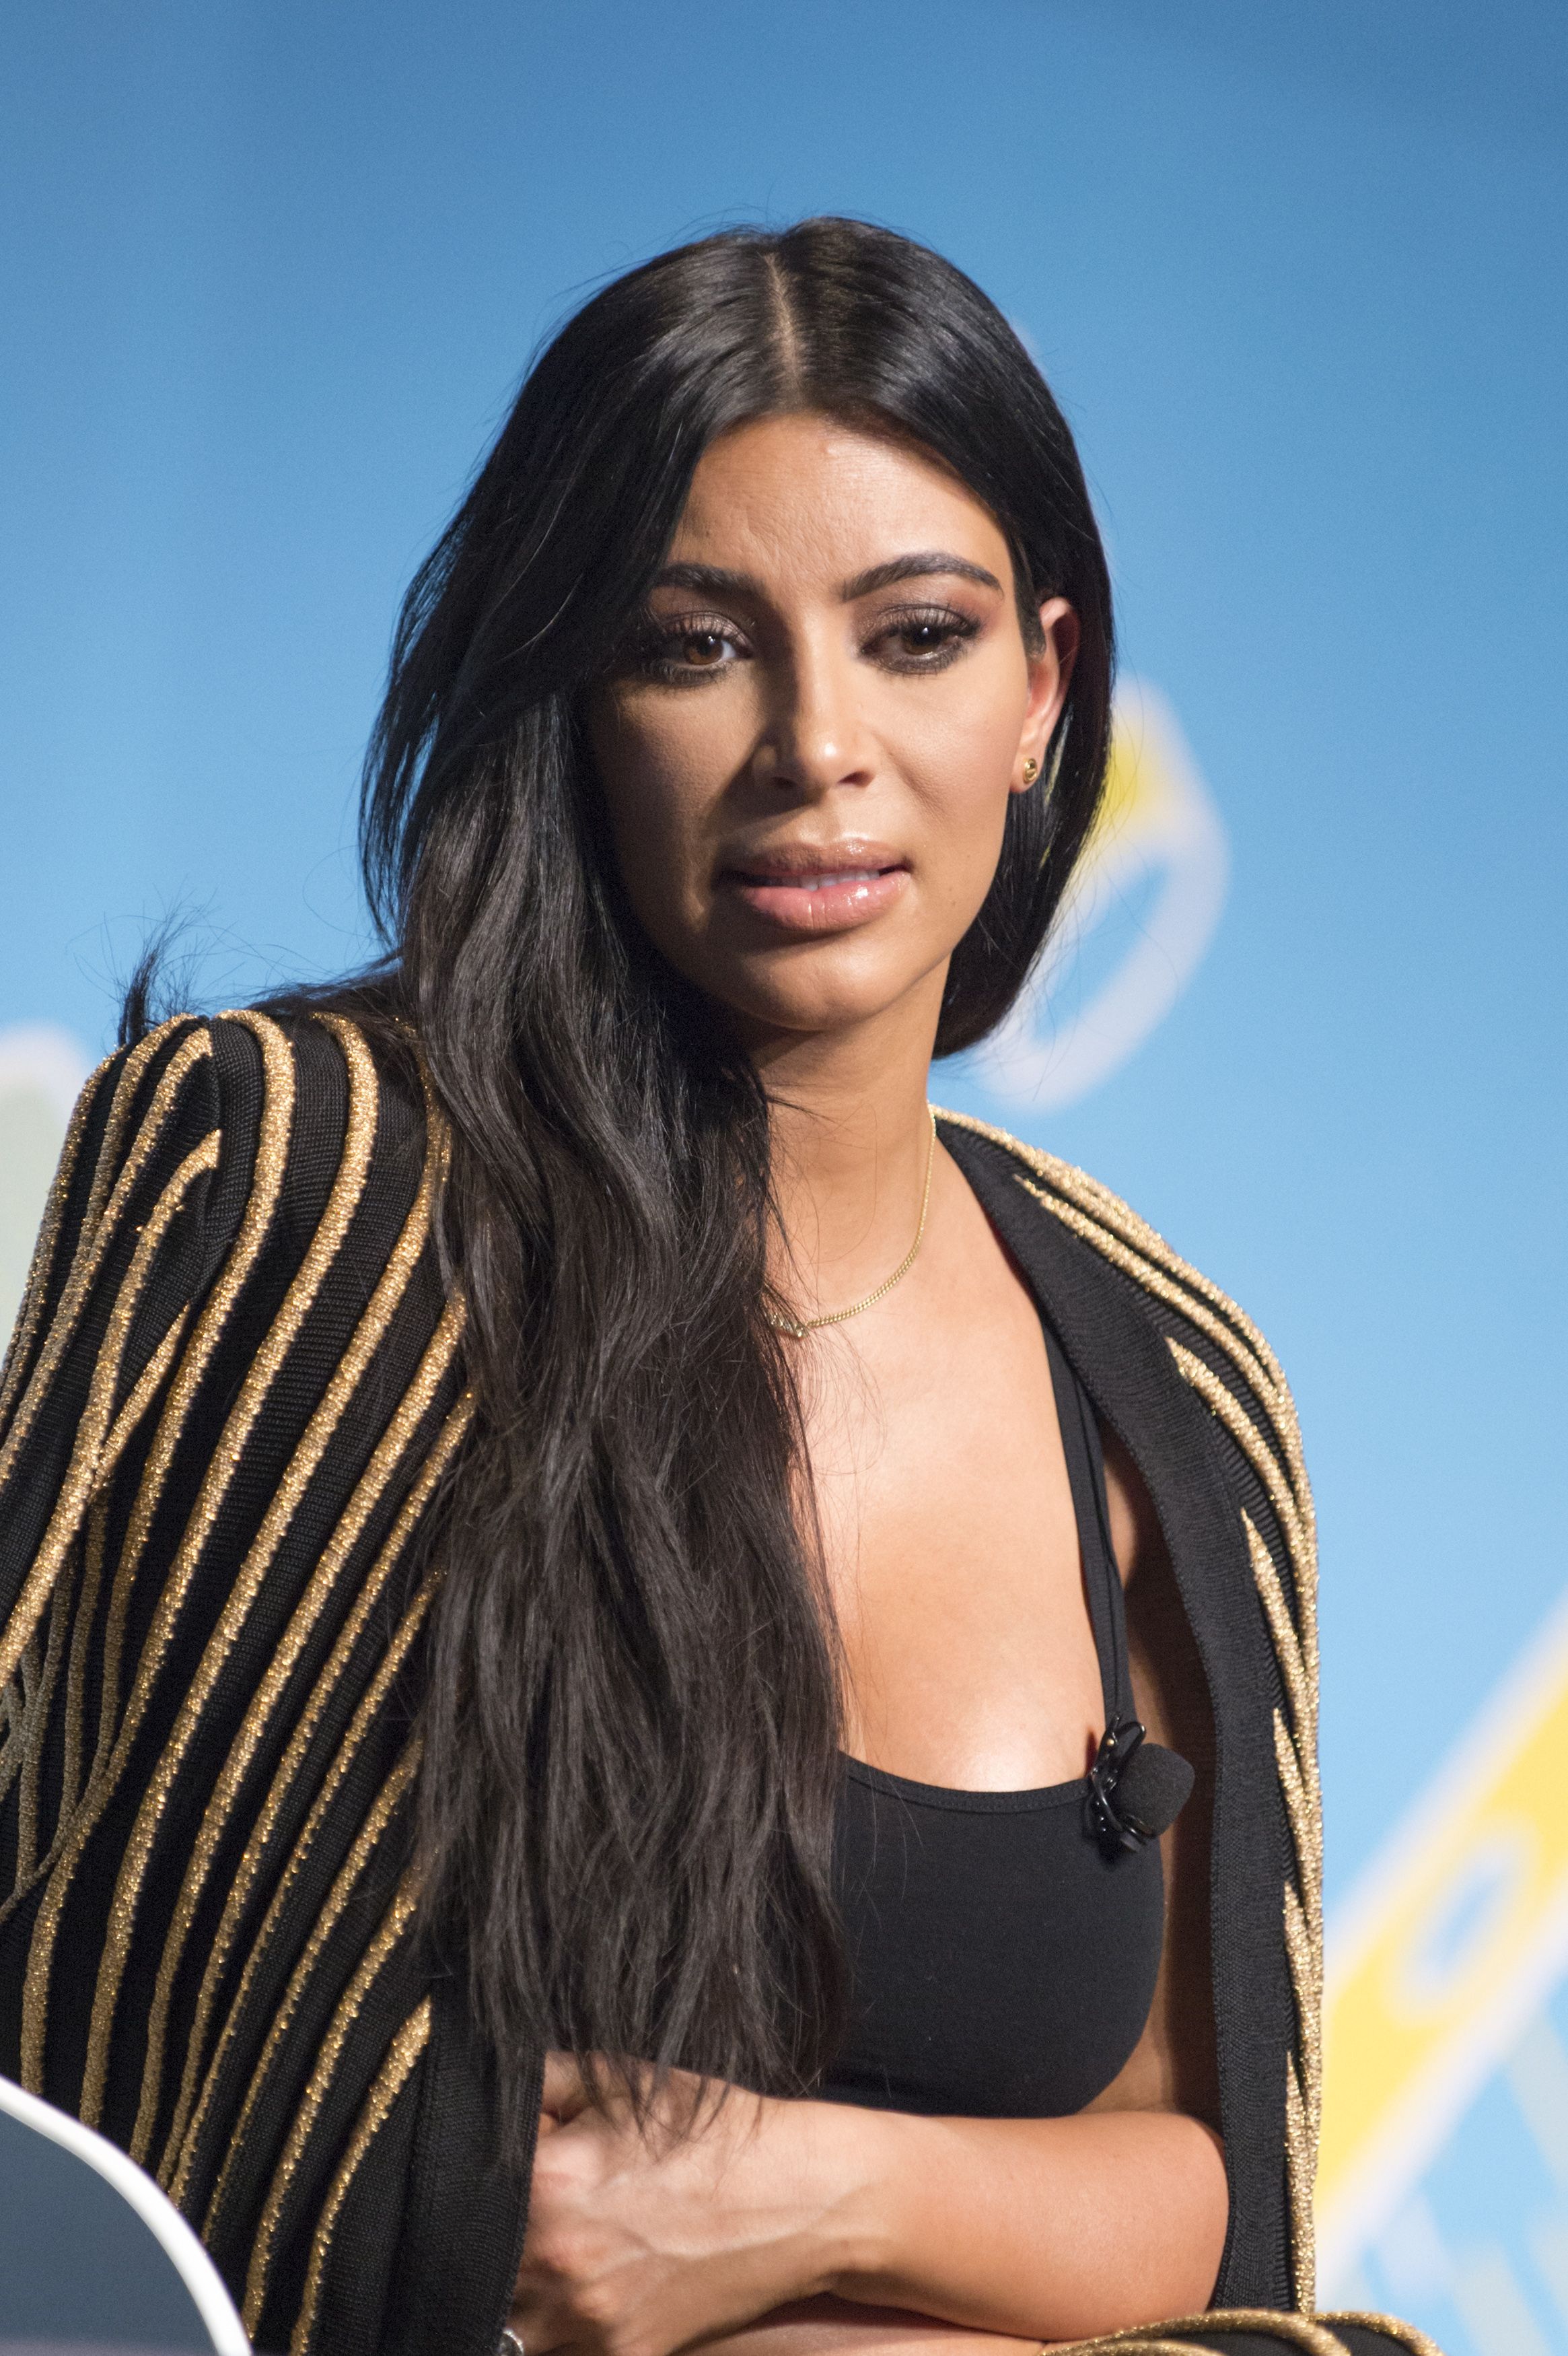 Kim Kardashian during the Sudler forum as part of the Cannes Lions International Festival of Creativity on June 24, 2015 in Cannes, France. | Source: Getty Images